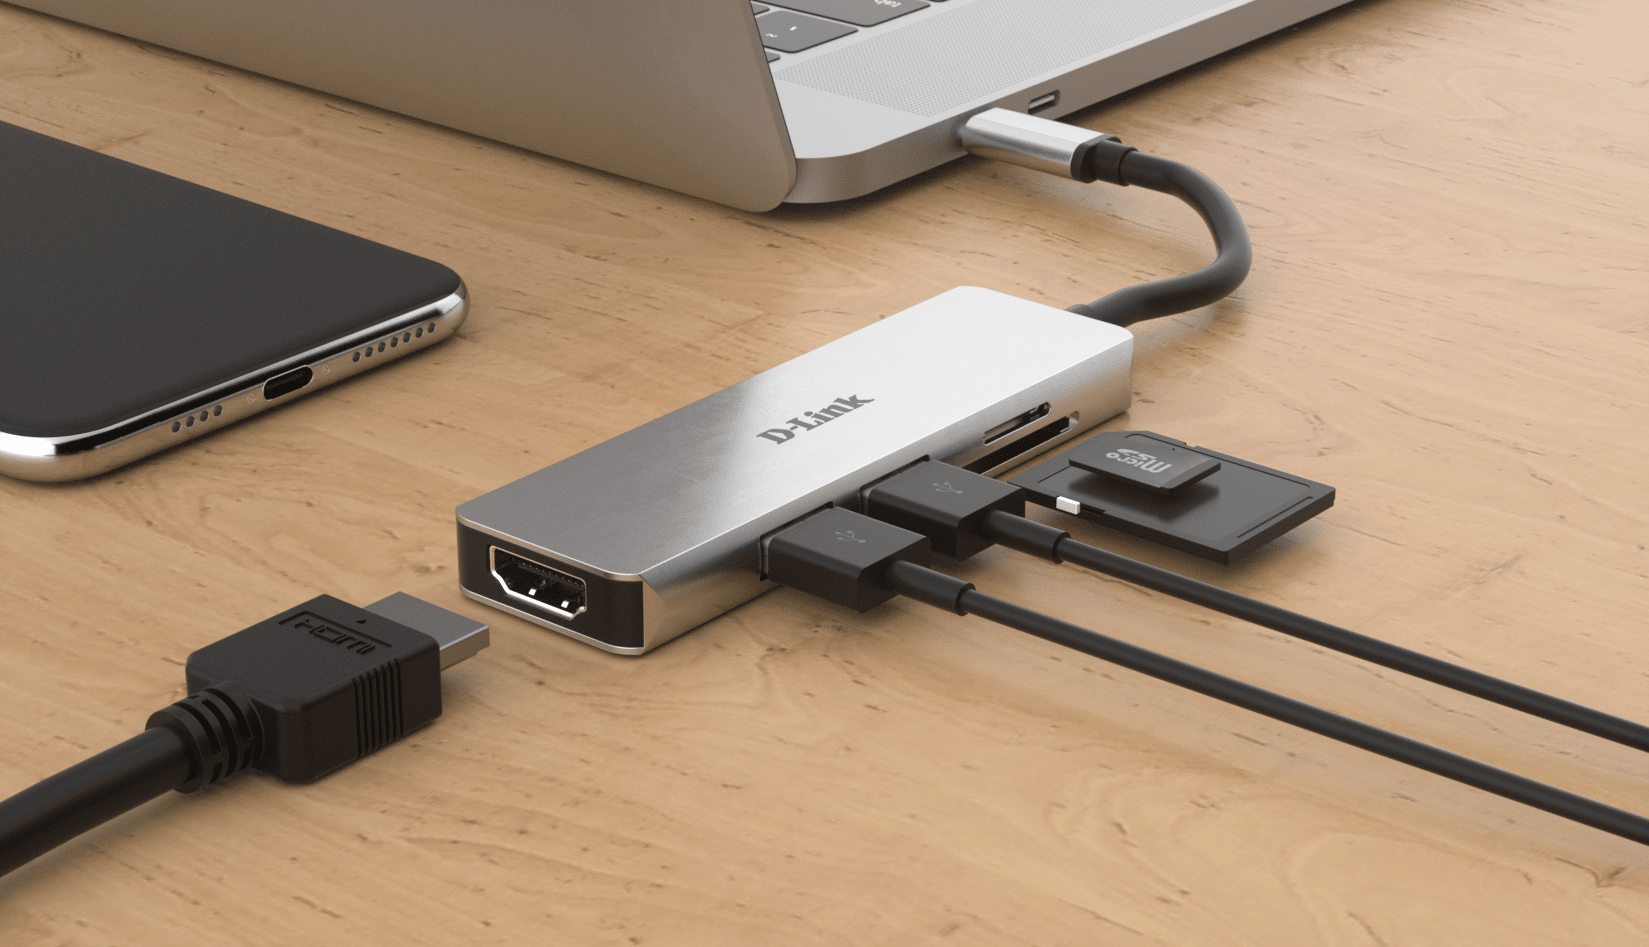 All smartphones sold in the EU will be forced to have USB-C port